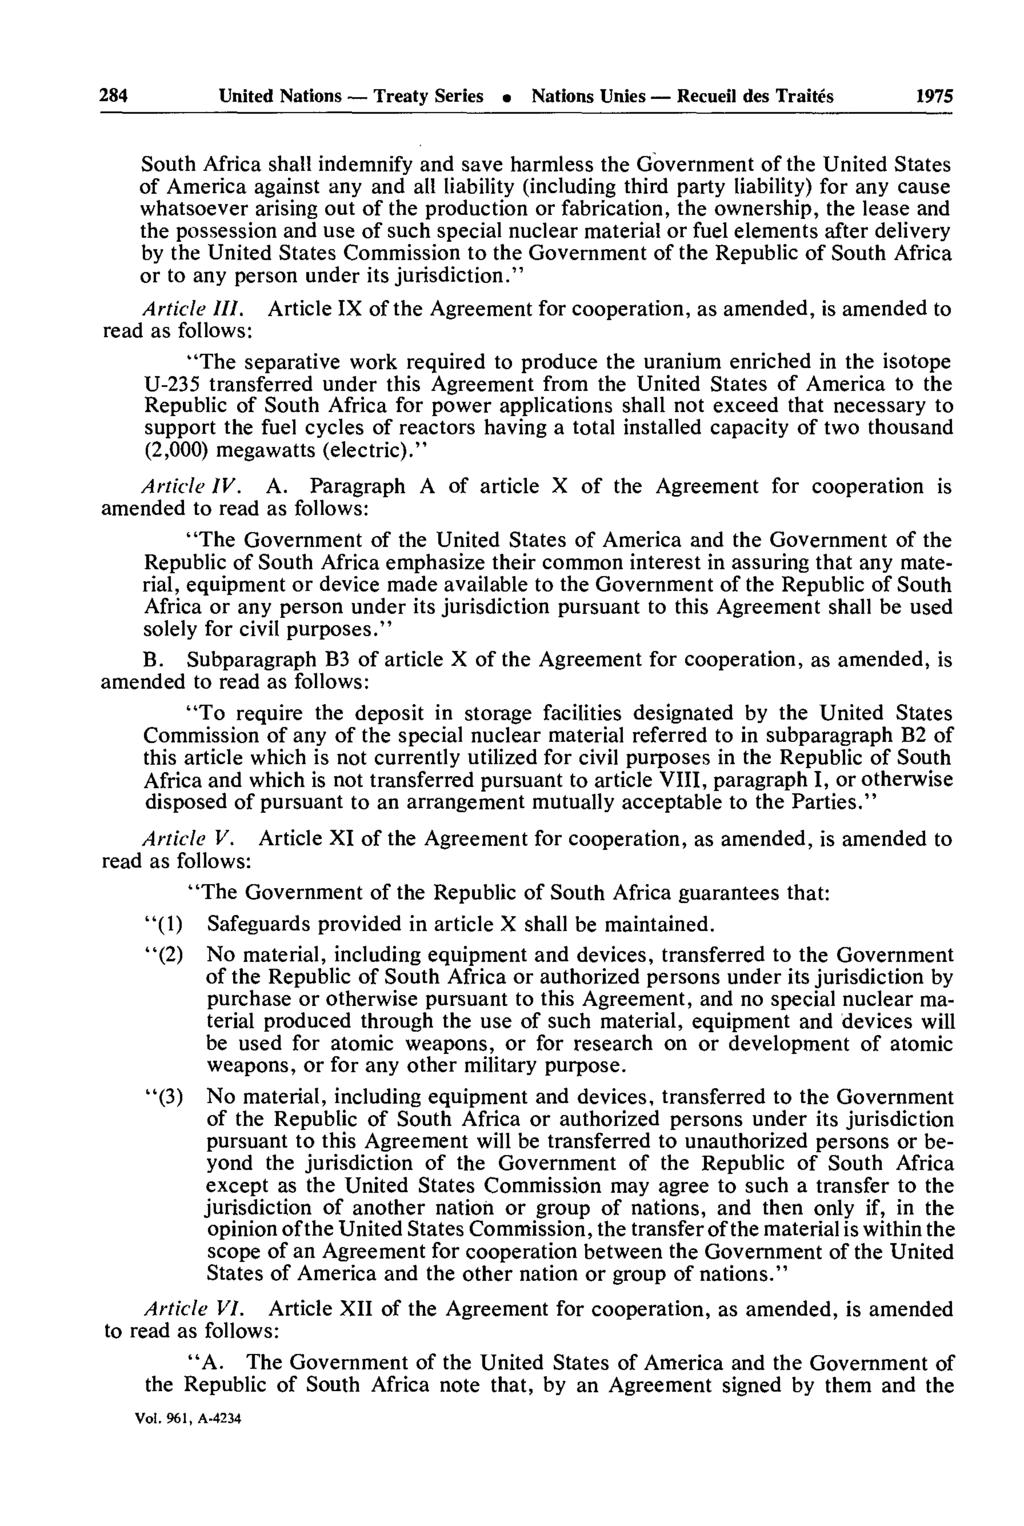 284 United Nations Treaty Series Nations Unies Recueil des Traités 1975 South Africa shall indemnify and save harmless the Government of the United States of America against any and all liability